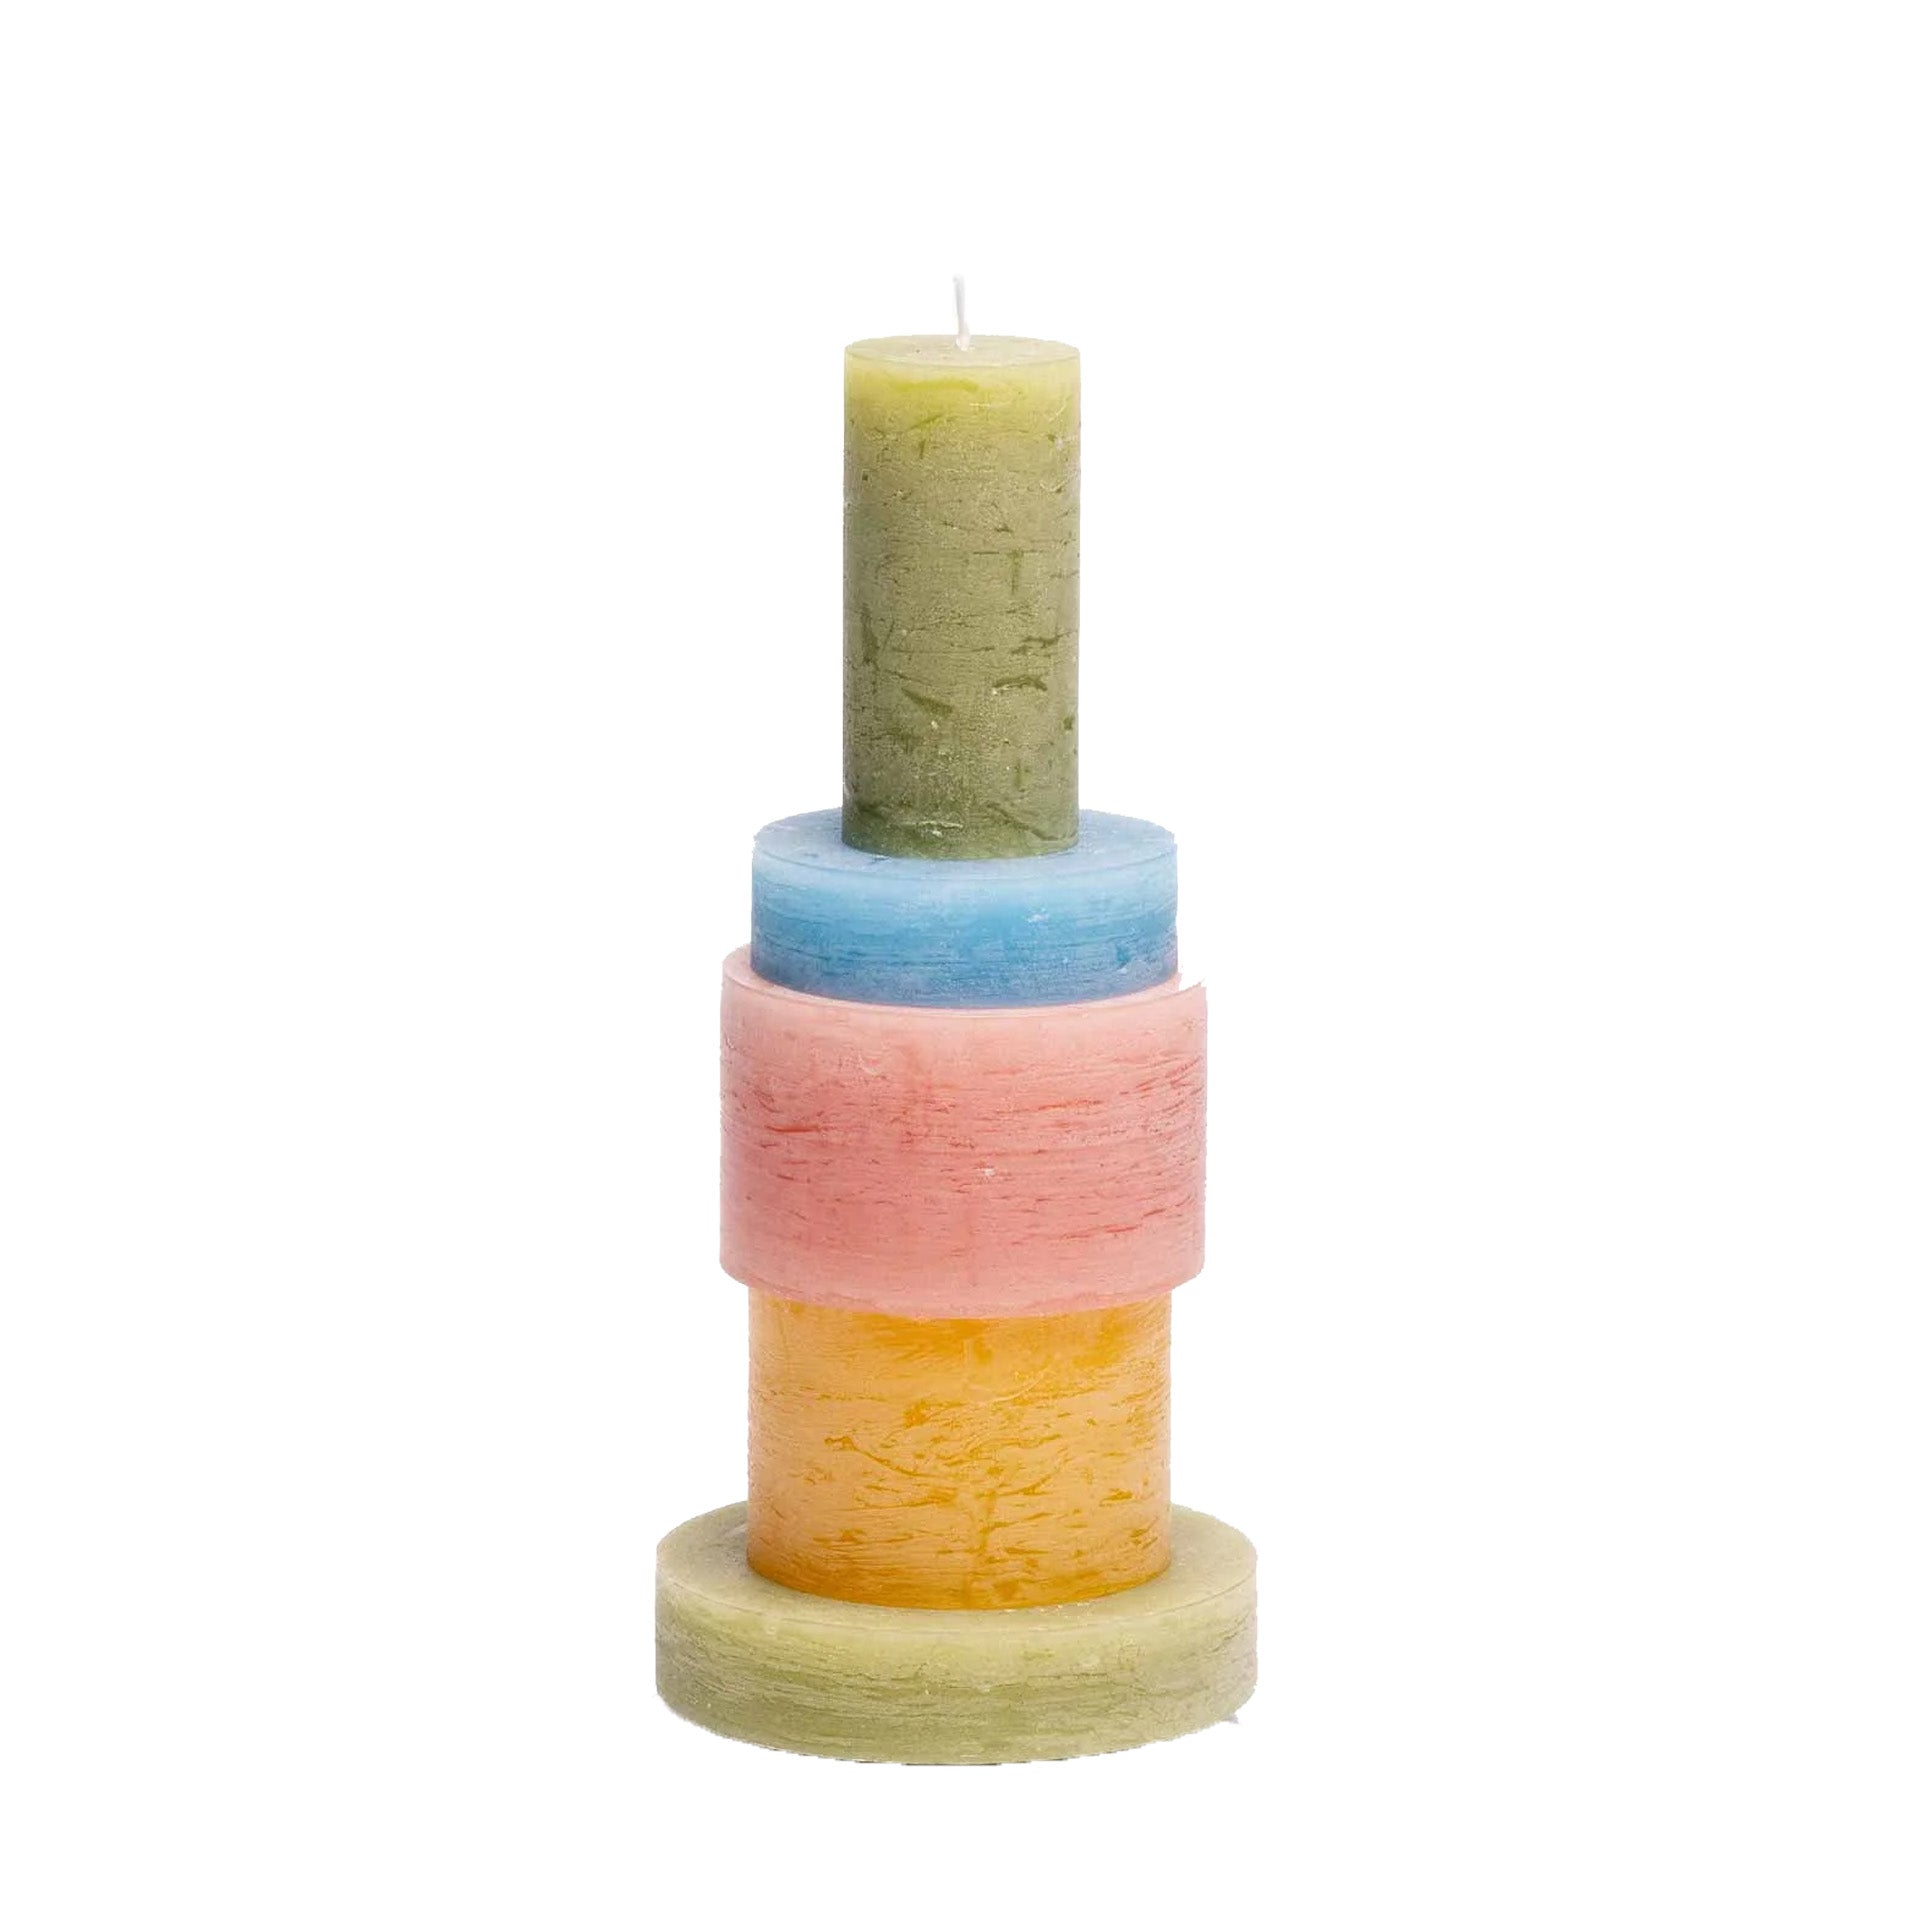 Candle Stack 03 in Pink and Yellow